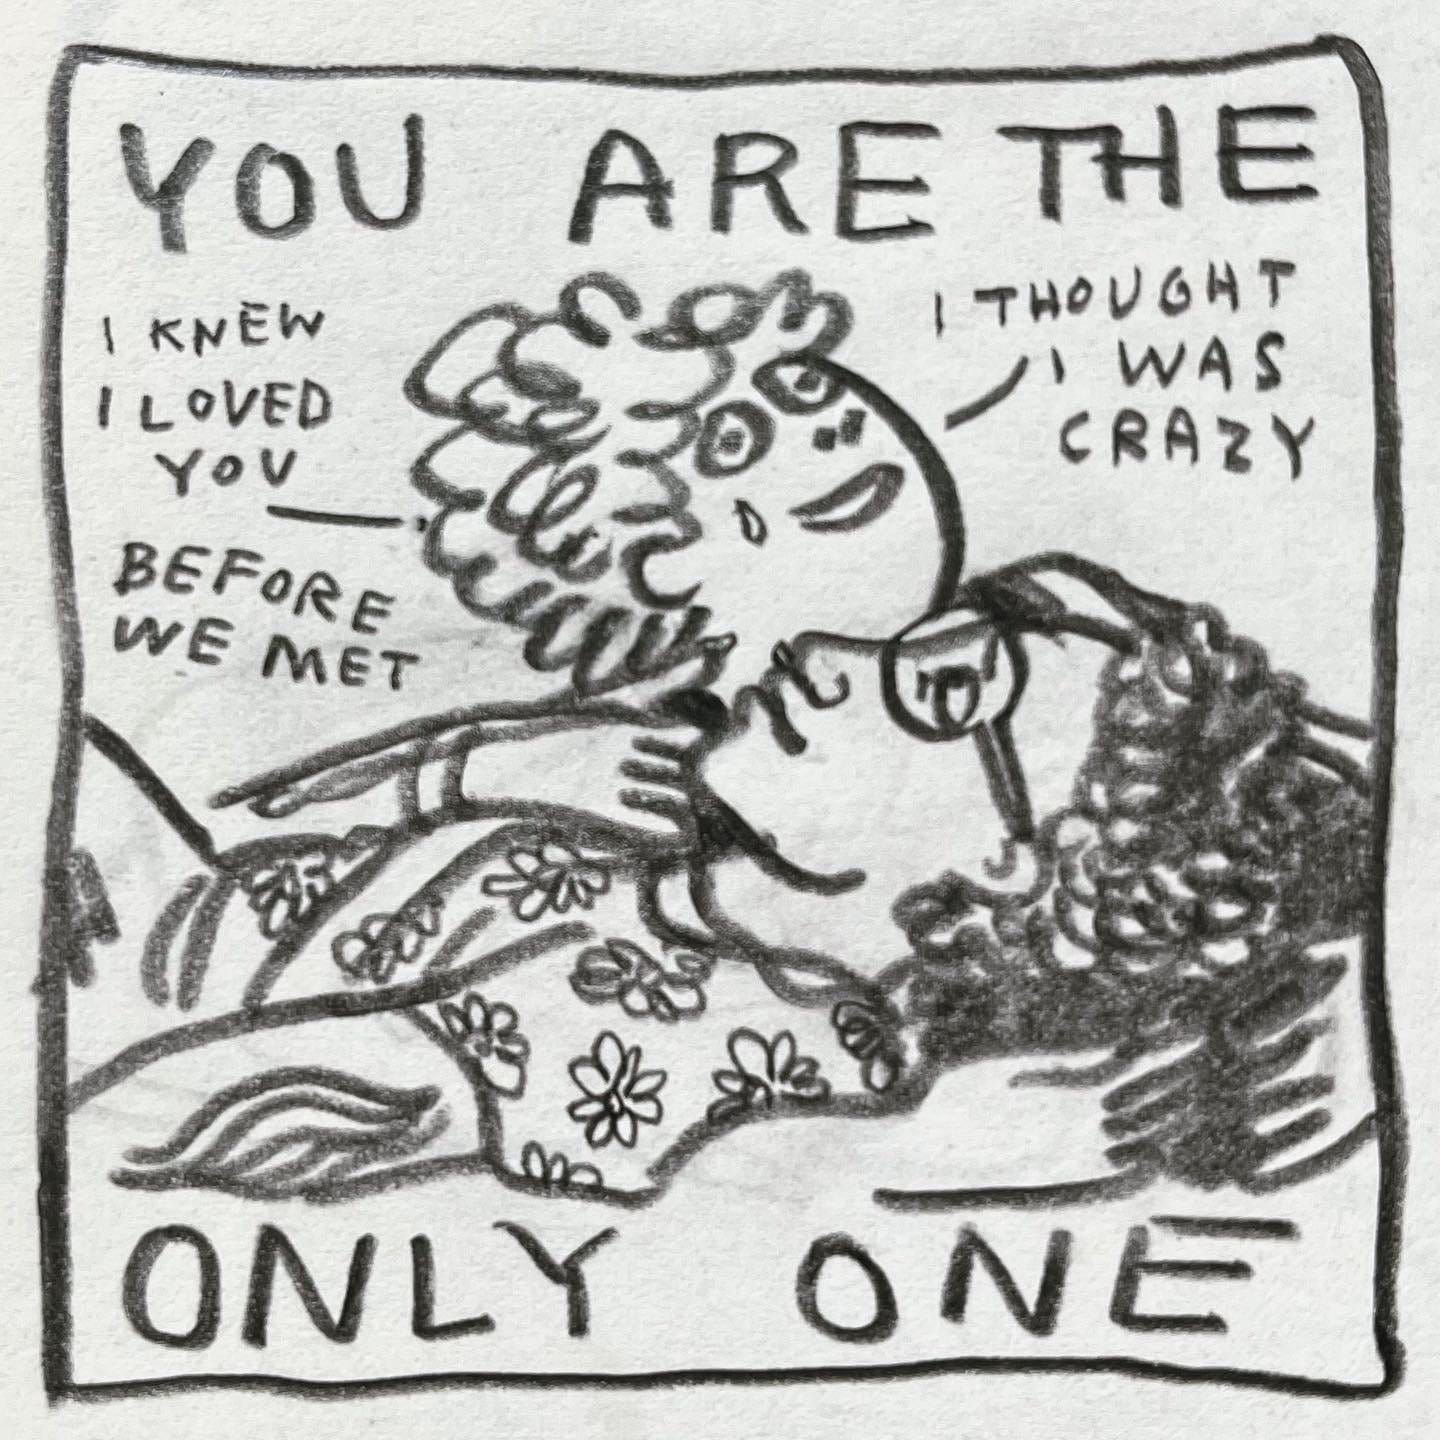 Panel 3: you are the only one Image: Maze is lying with their head on Lark’s chest. Their arms are intertwined. Lark cries and smiles, saying "I knew I loved you before we met. I thought I was crazy"